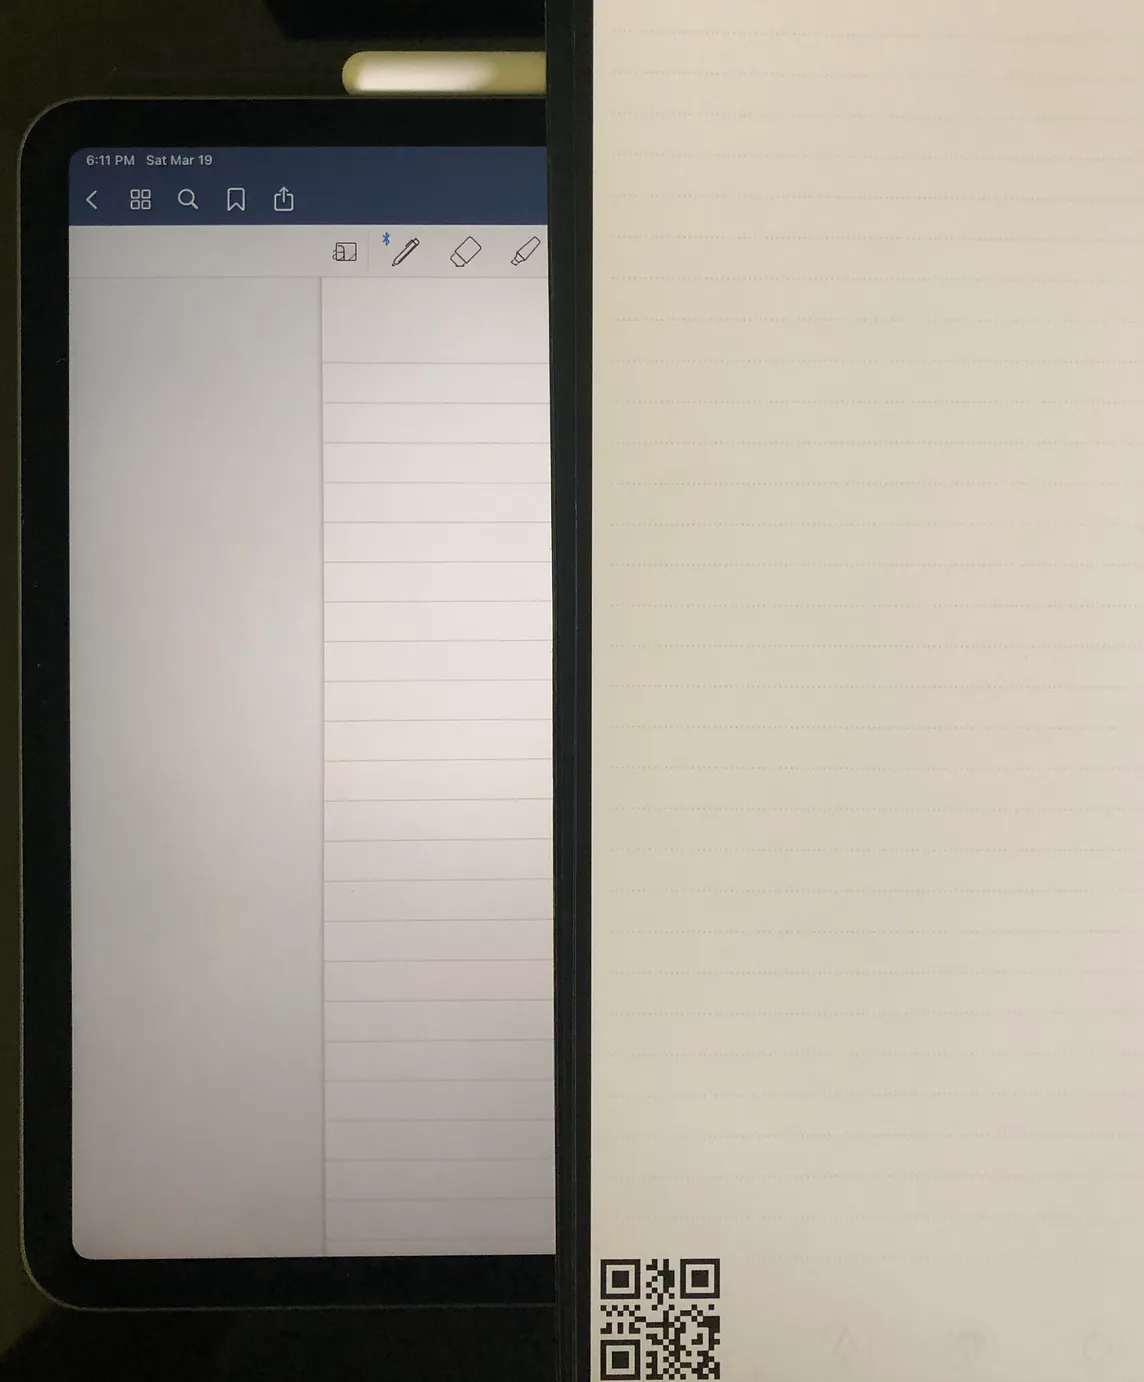 The iPad vs. The Rocketbook for Note-Taking